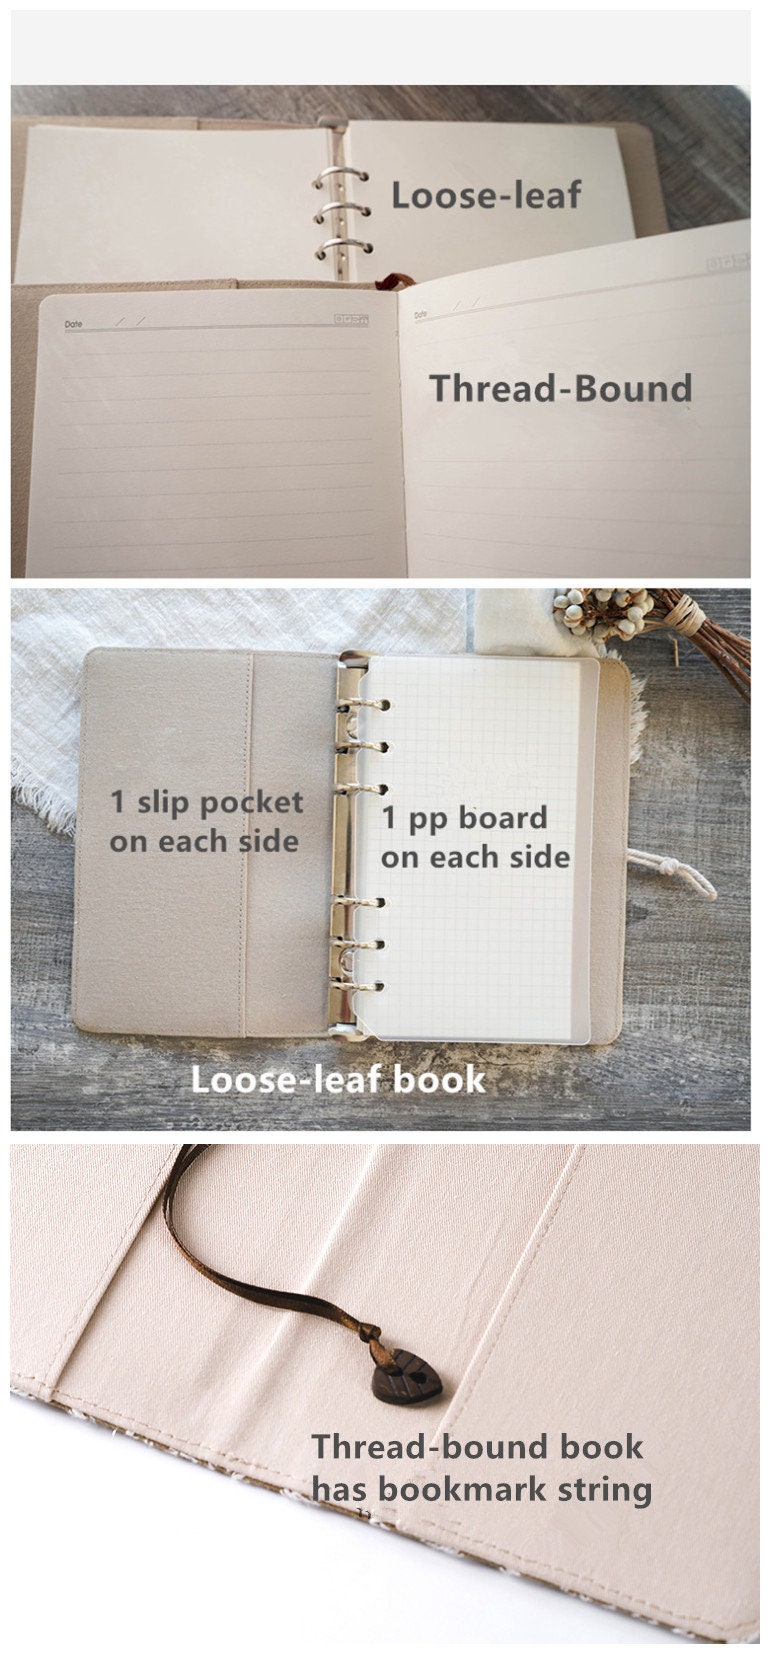 Woolen Plaid Covered Journal Notebook A5 A6 Loose-leaf Thread-bound Blank Lined Pages Retro Woolen Fabric Handmade Book Diary Book Notepad